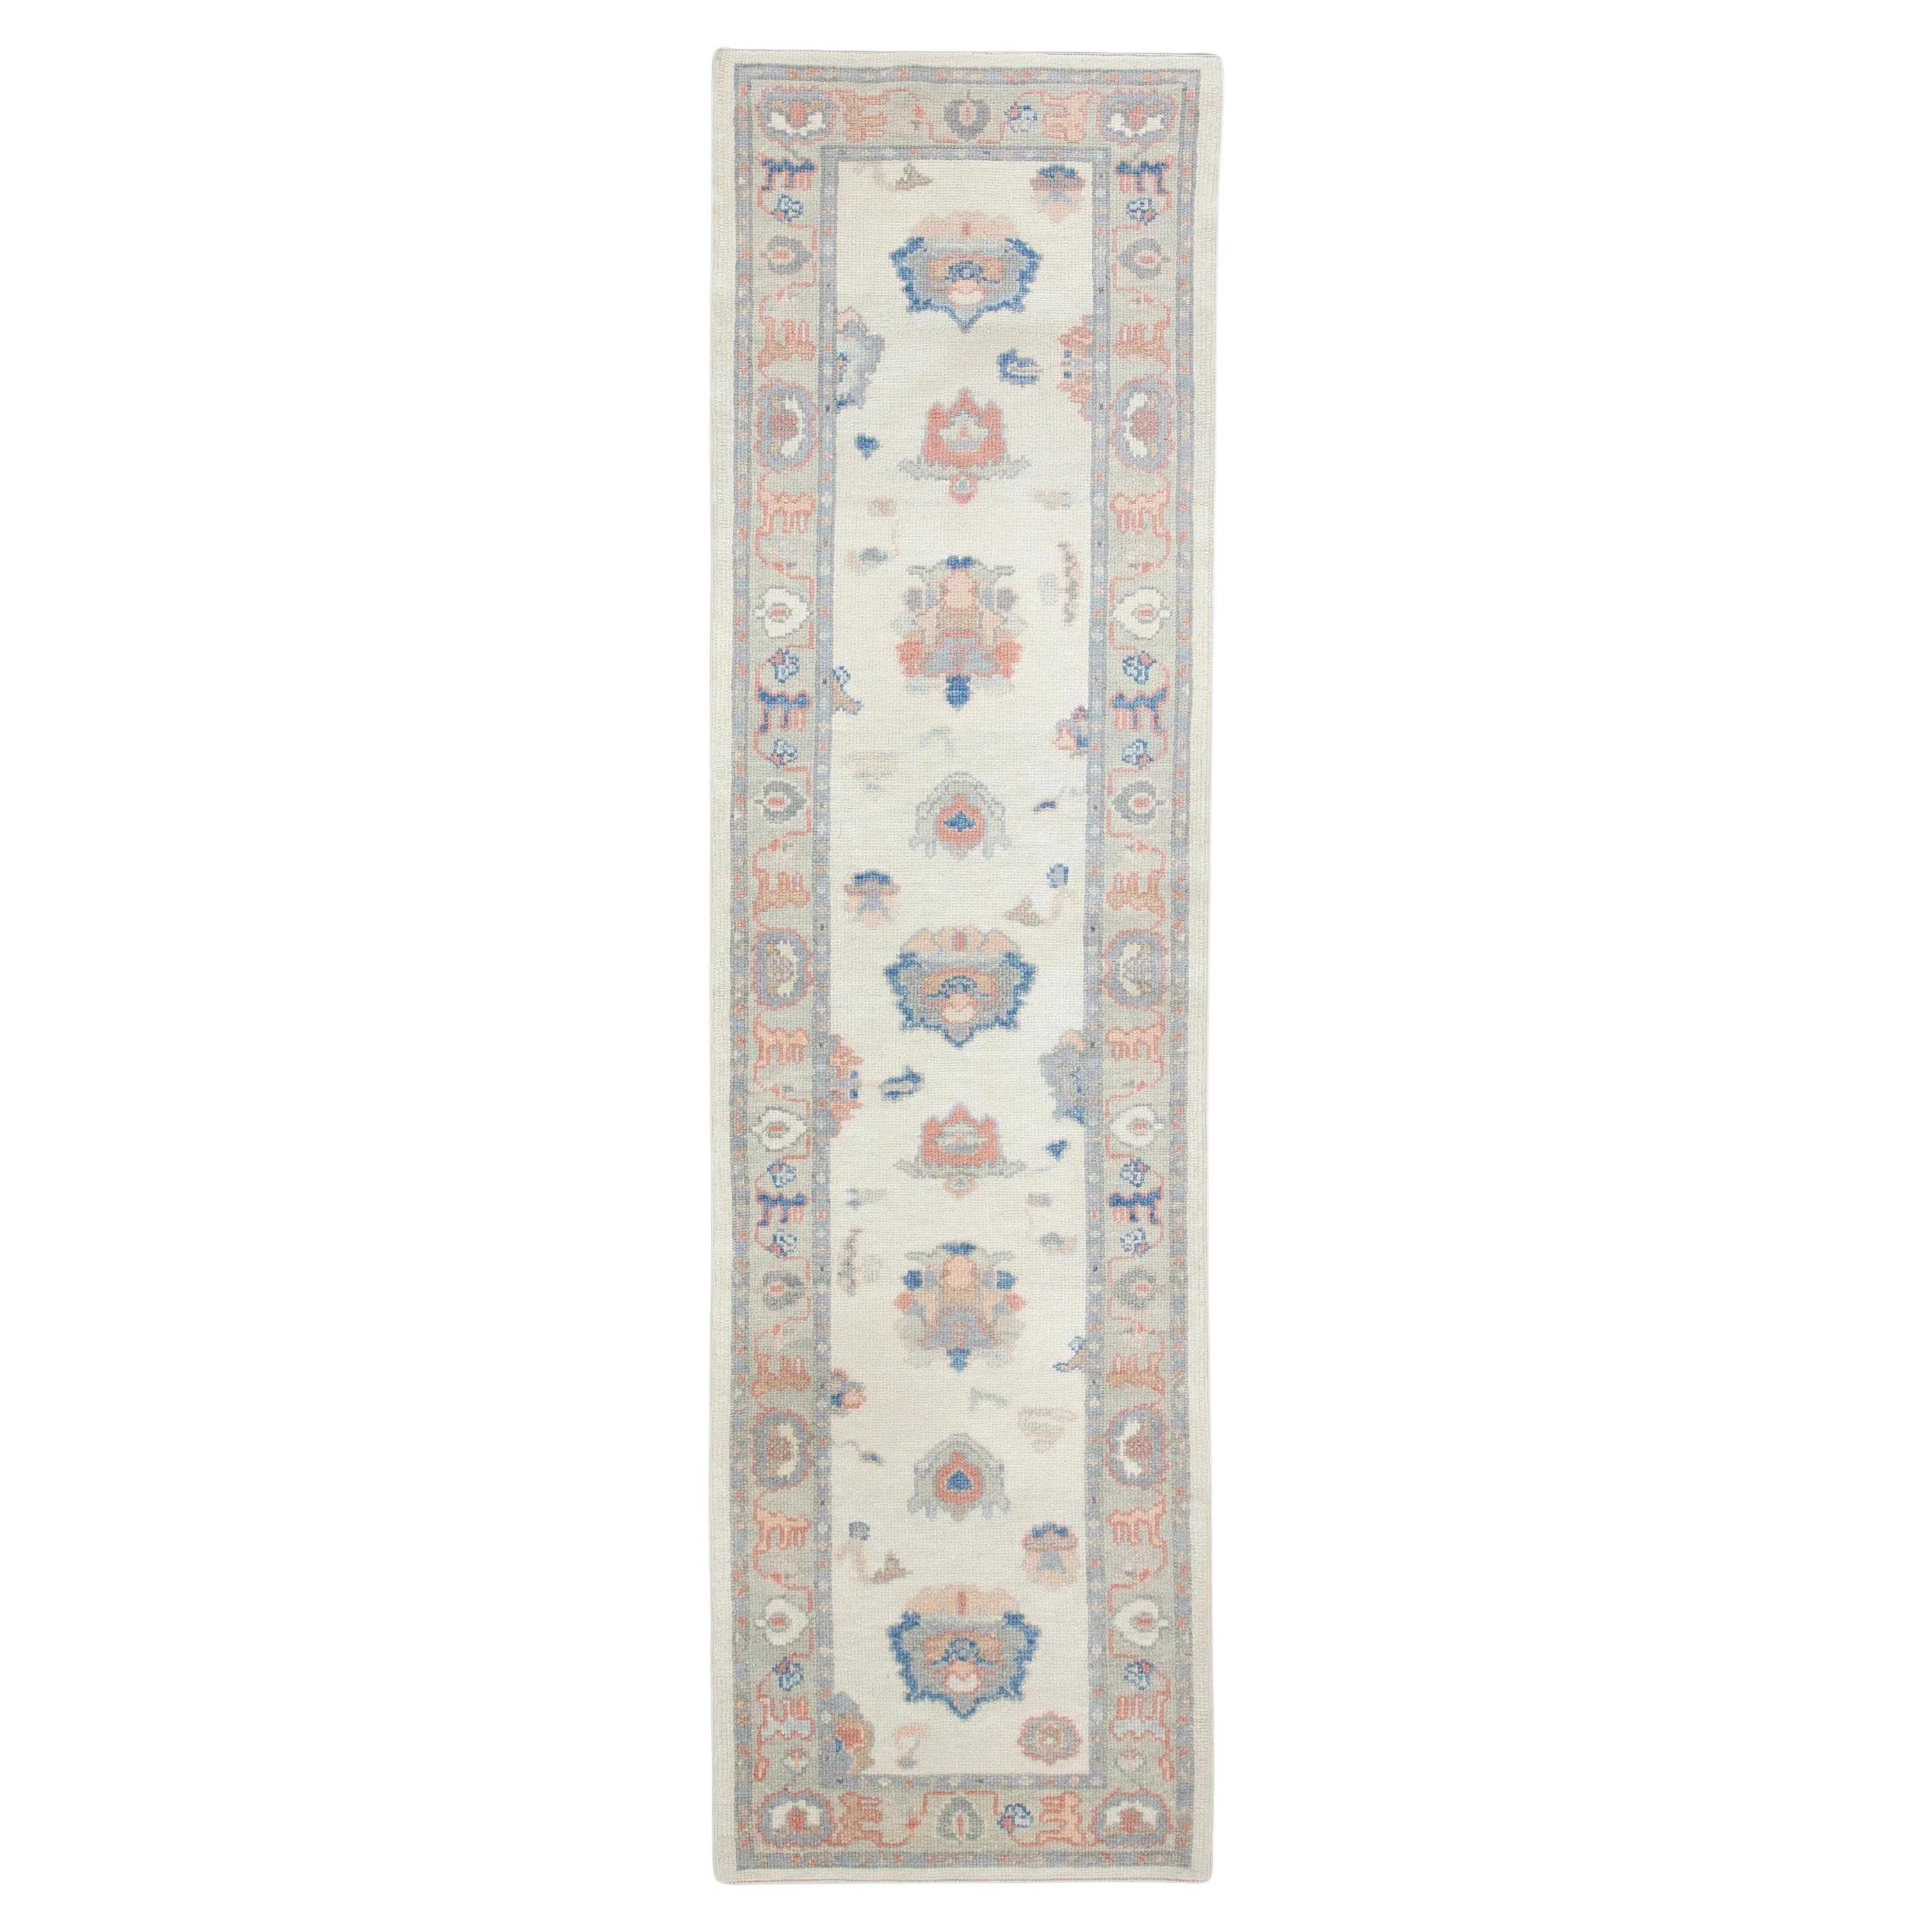 Cream Handwoven Wool Turkish Oushak Rug in Blue & Pink Floral Design 2'9" x 9'9" For Sale